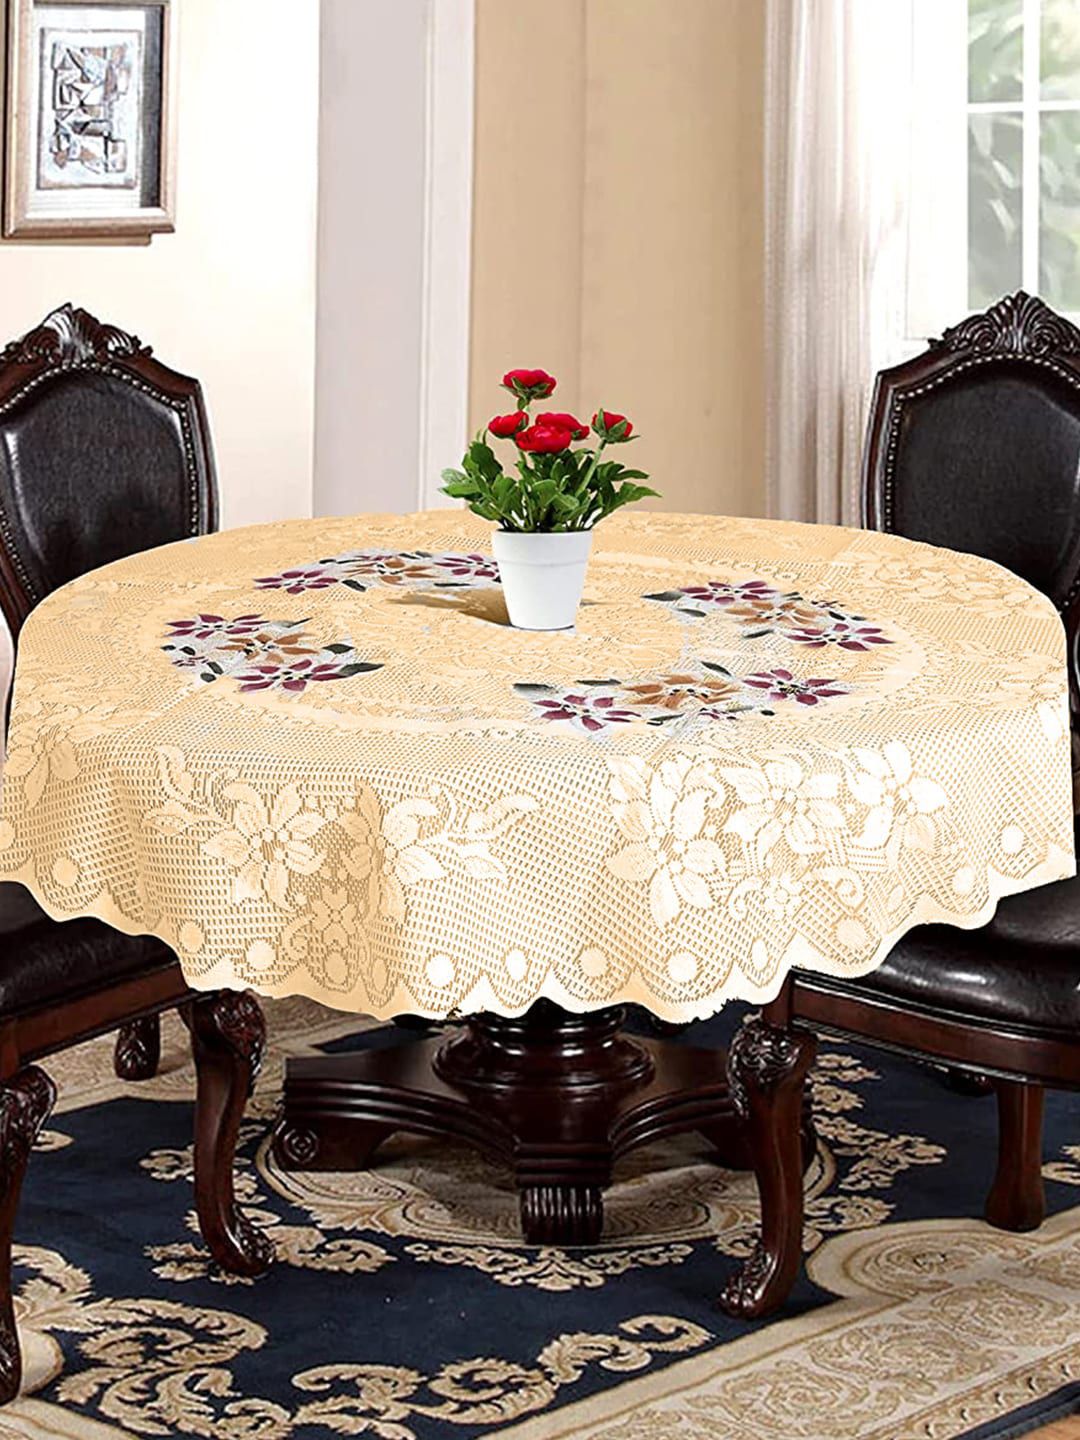 Kuber Industries Cream & Maroon Flower Printed Cotton Round Table Cover Price in India